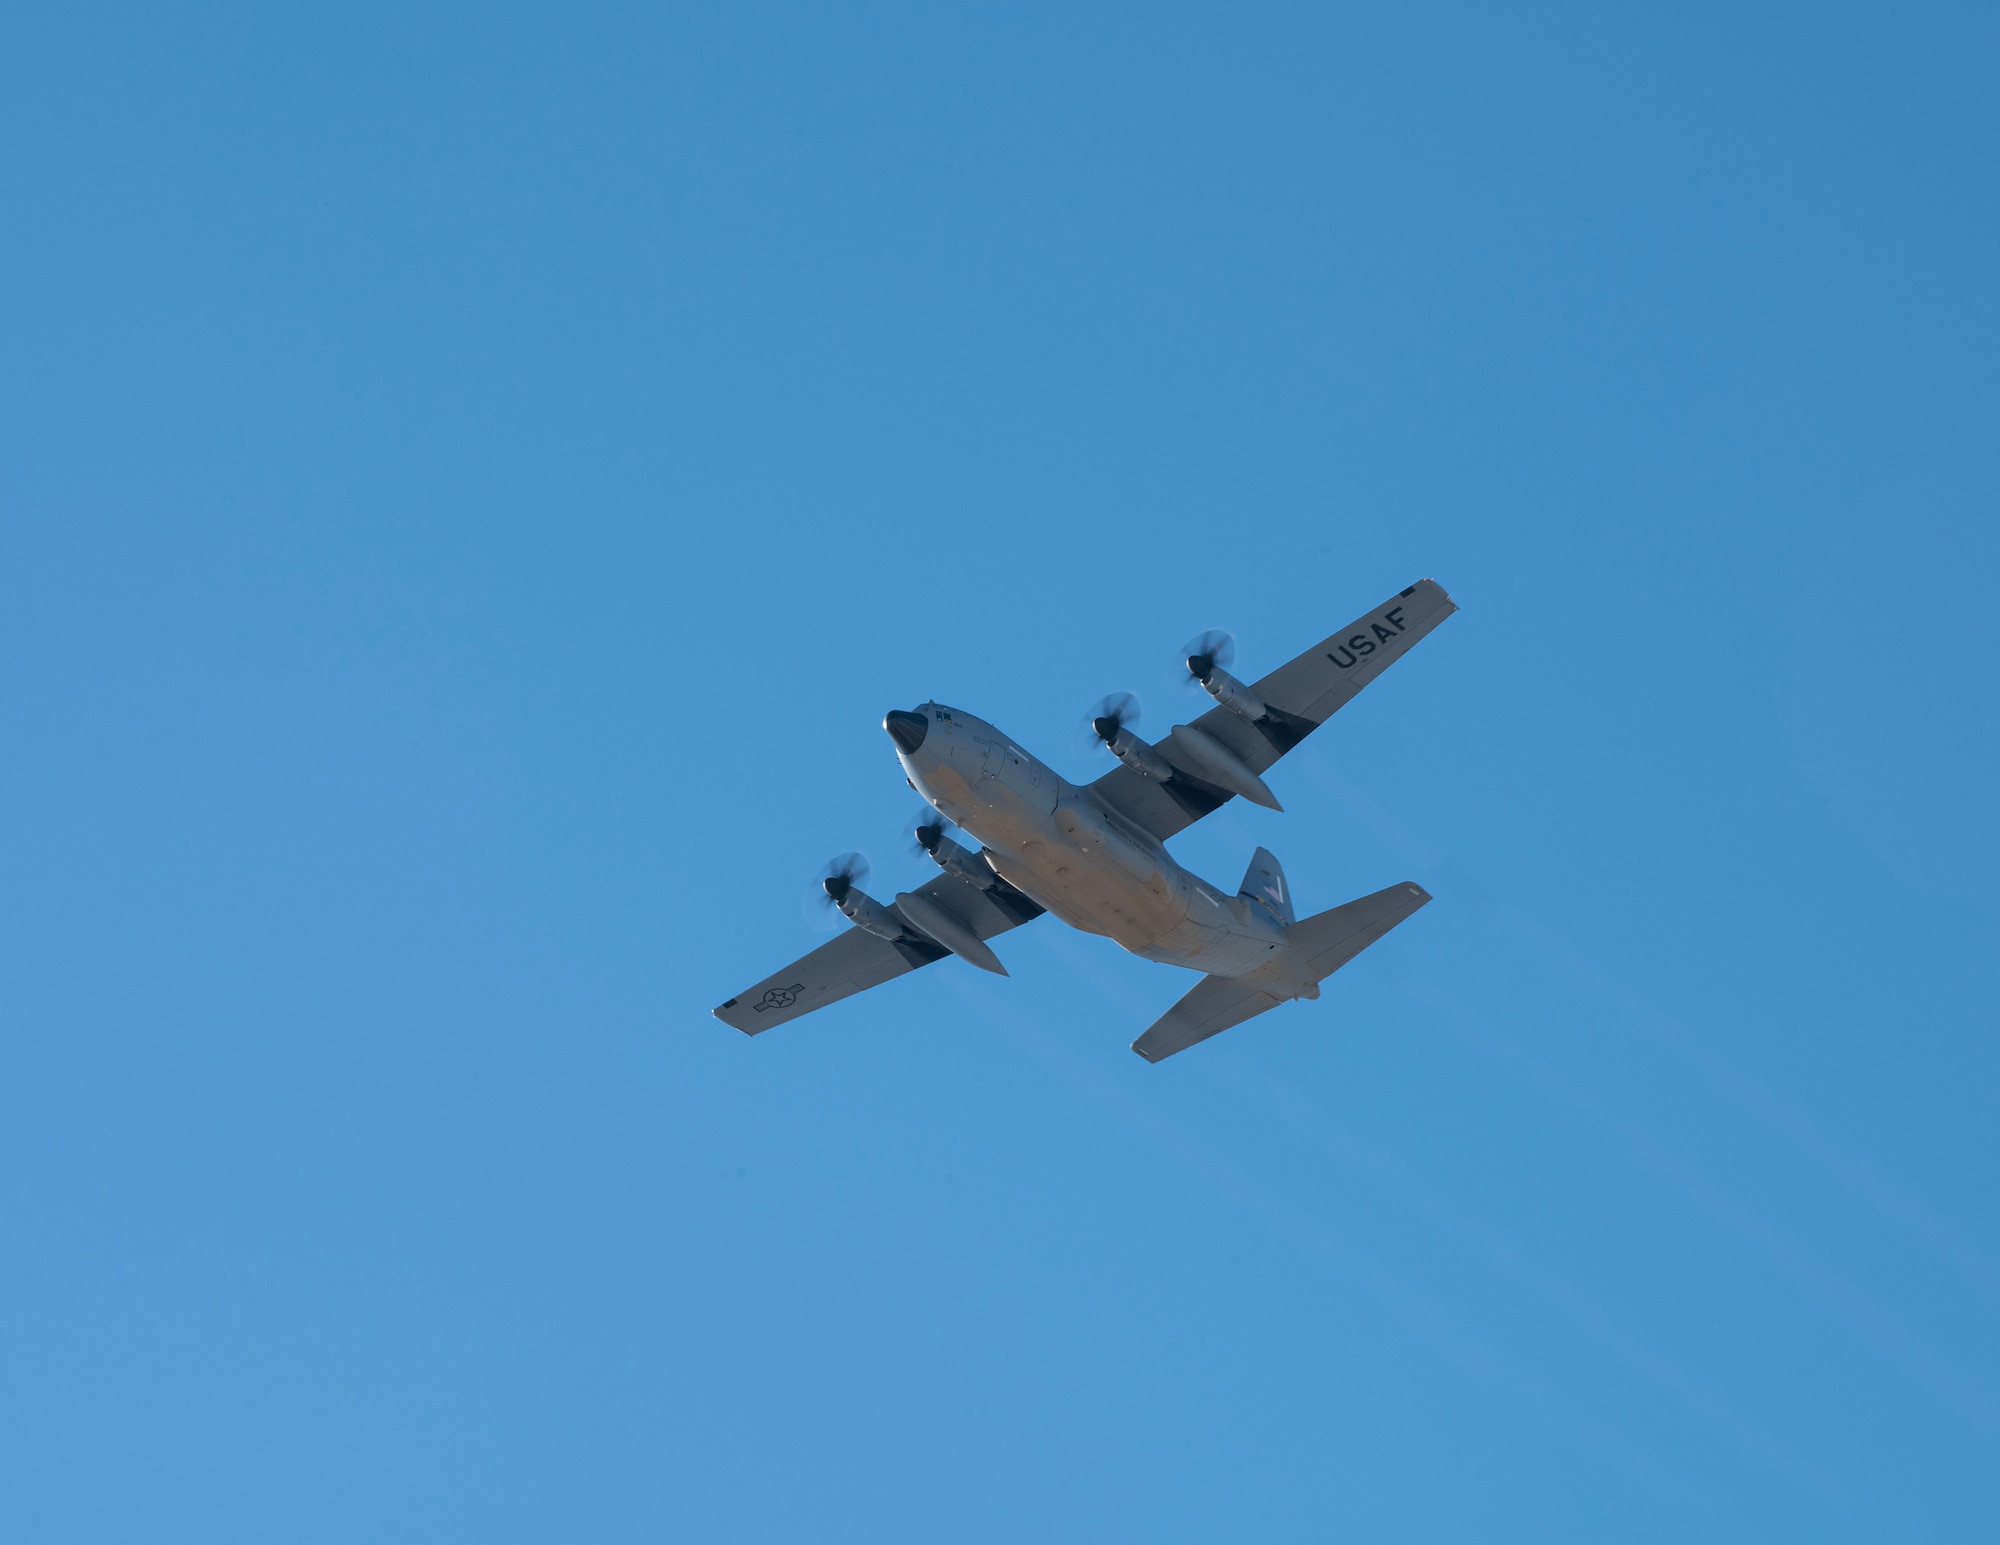 A C-130 Hercules from the 133rd Airlift Wing flies over the base during U.S. Air Force Col. James Cleet, 133rd Airlift Wing commander, fini-flight in St. Paul, Minn., Feb. 13, 2023.